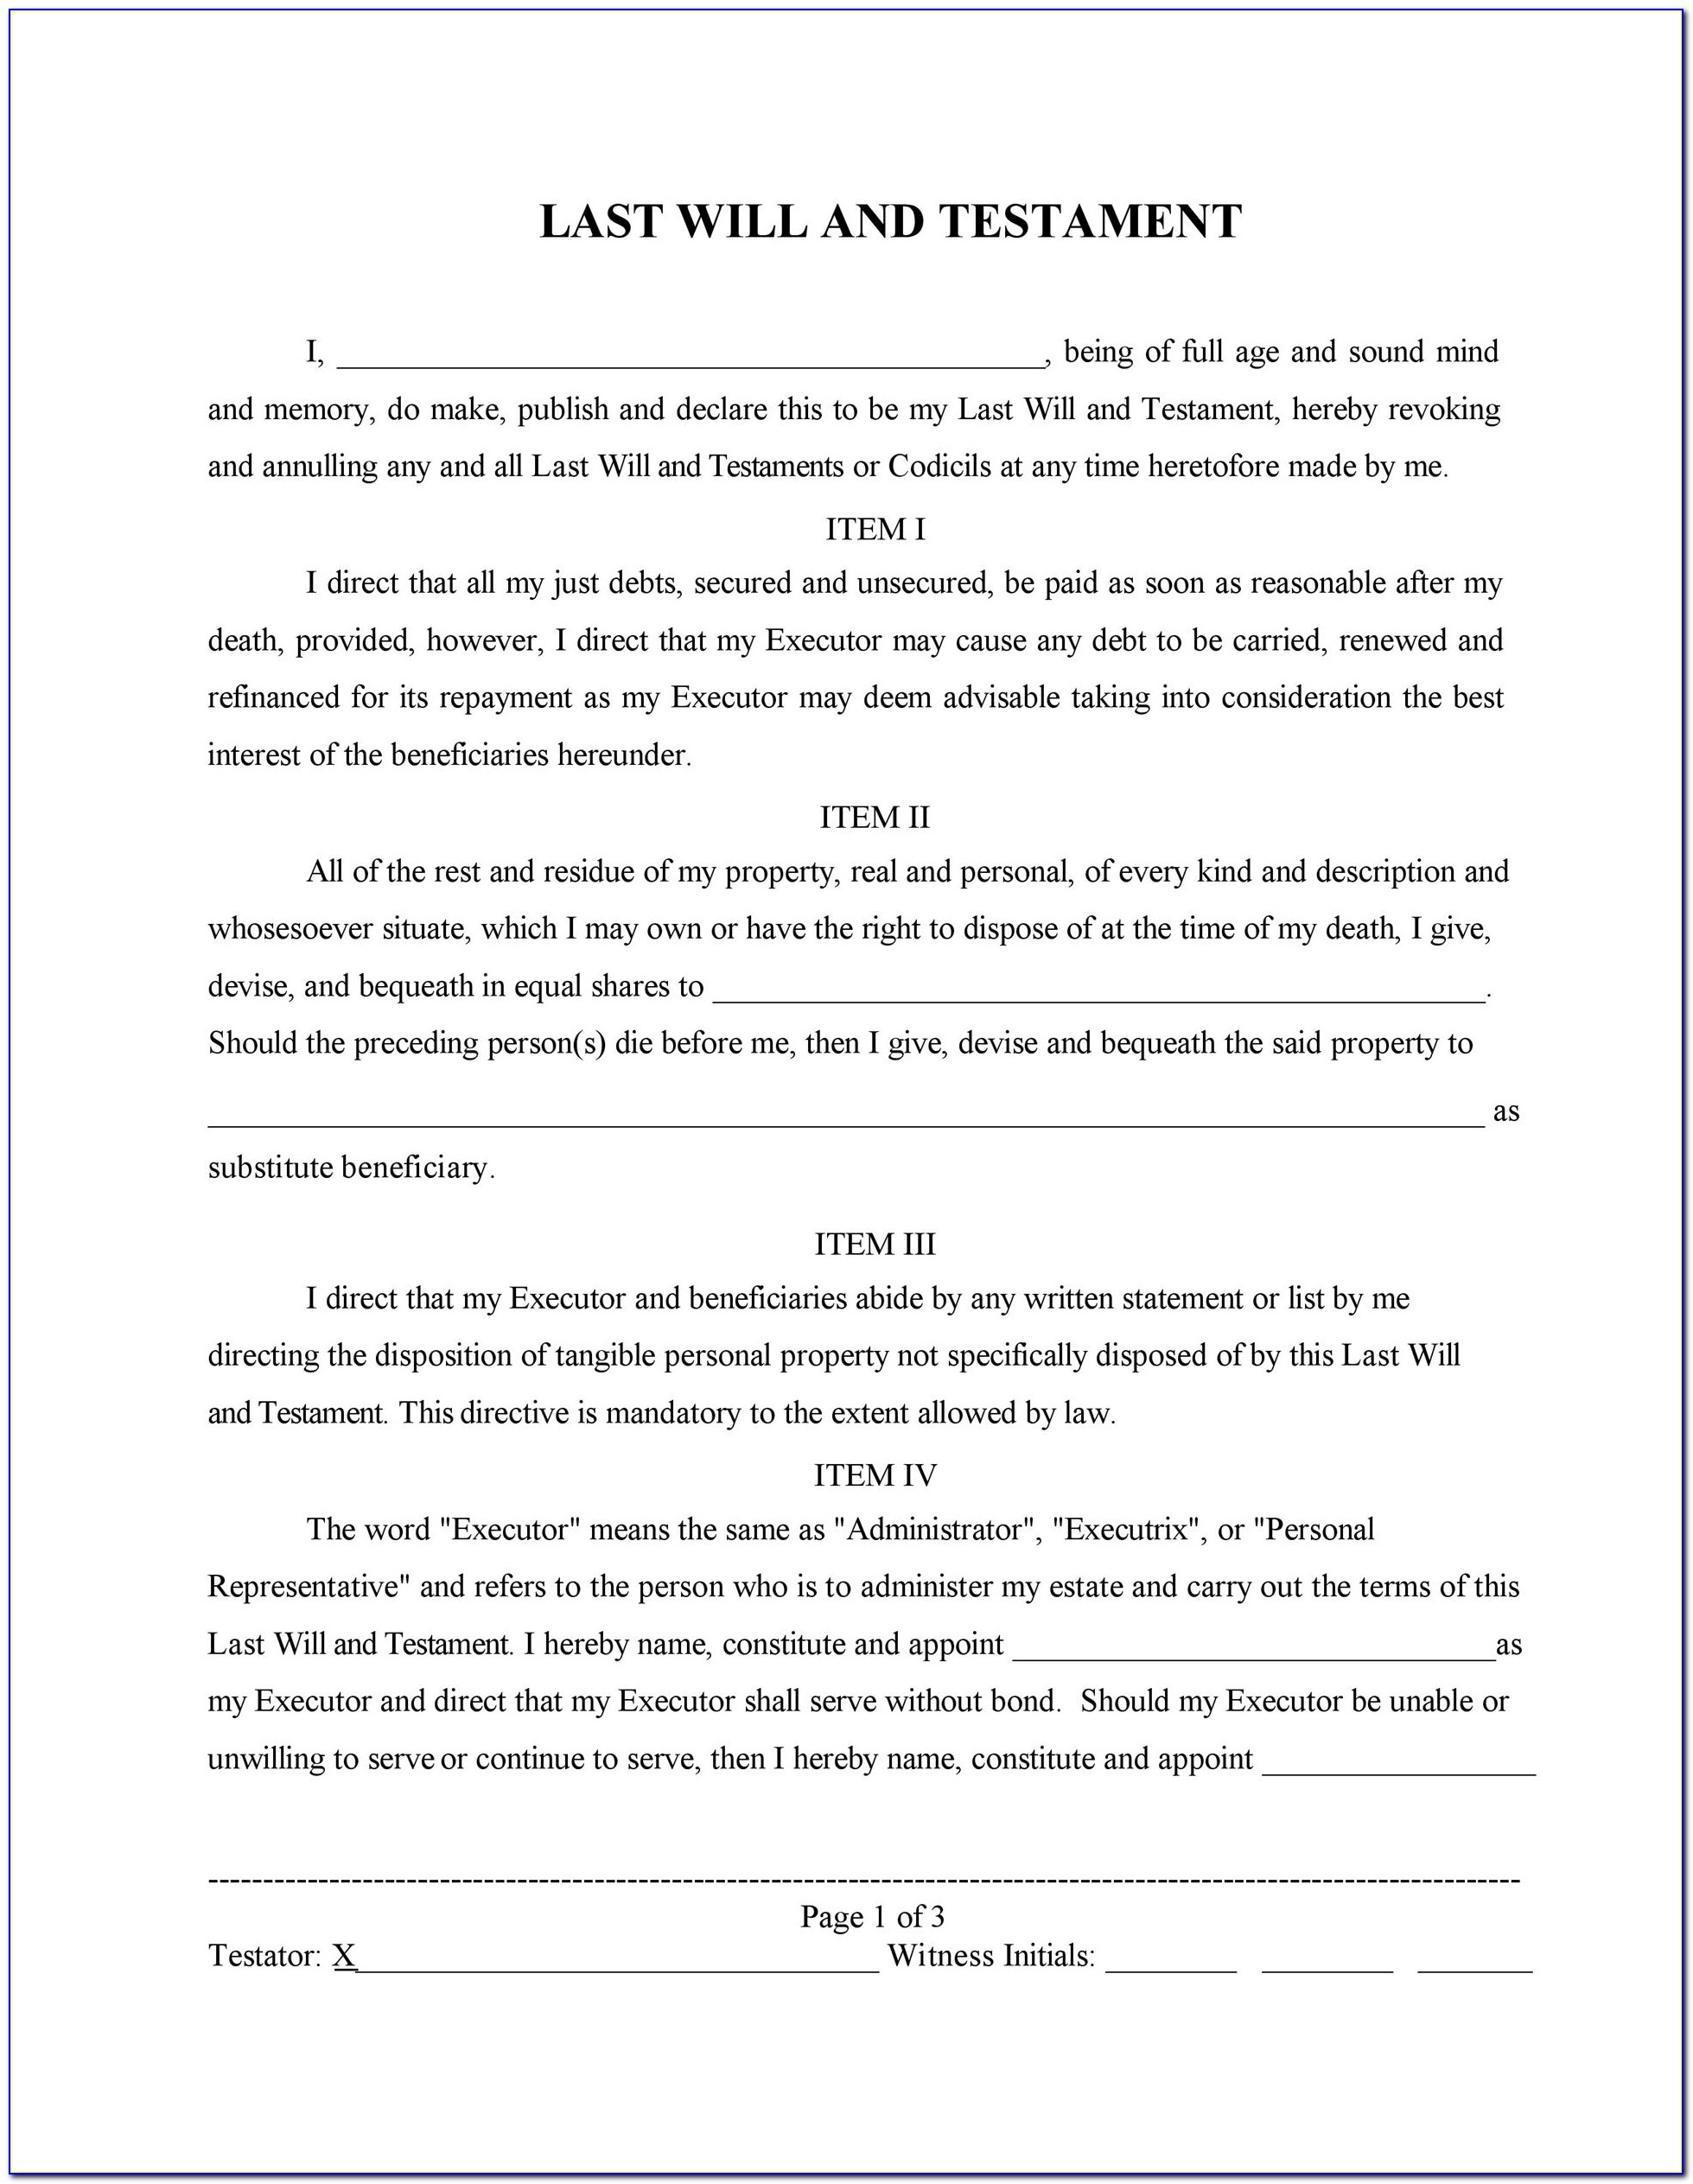 printable-last-will-and-testament-texas